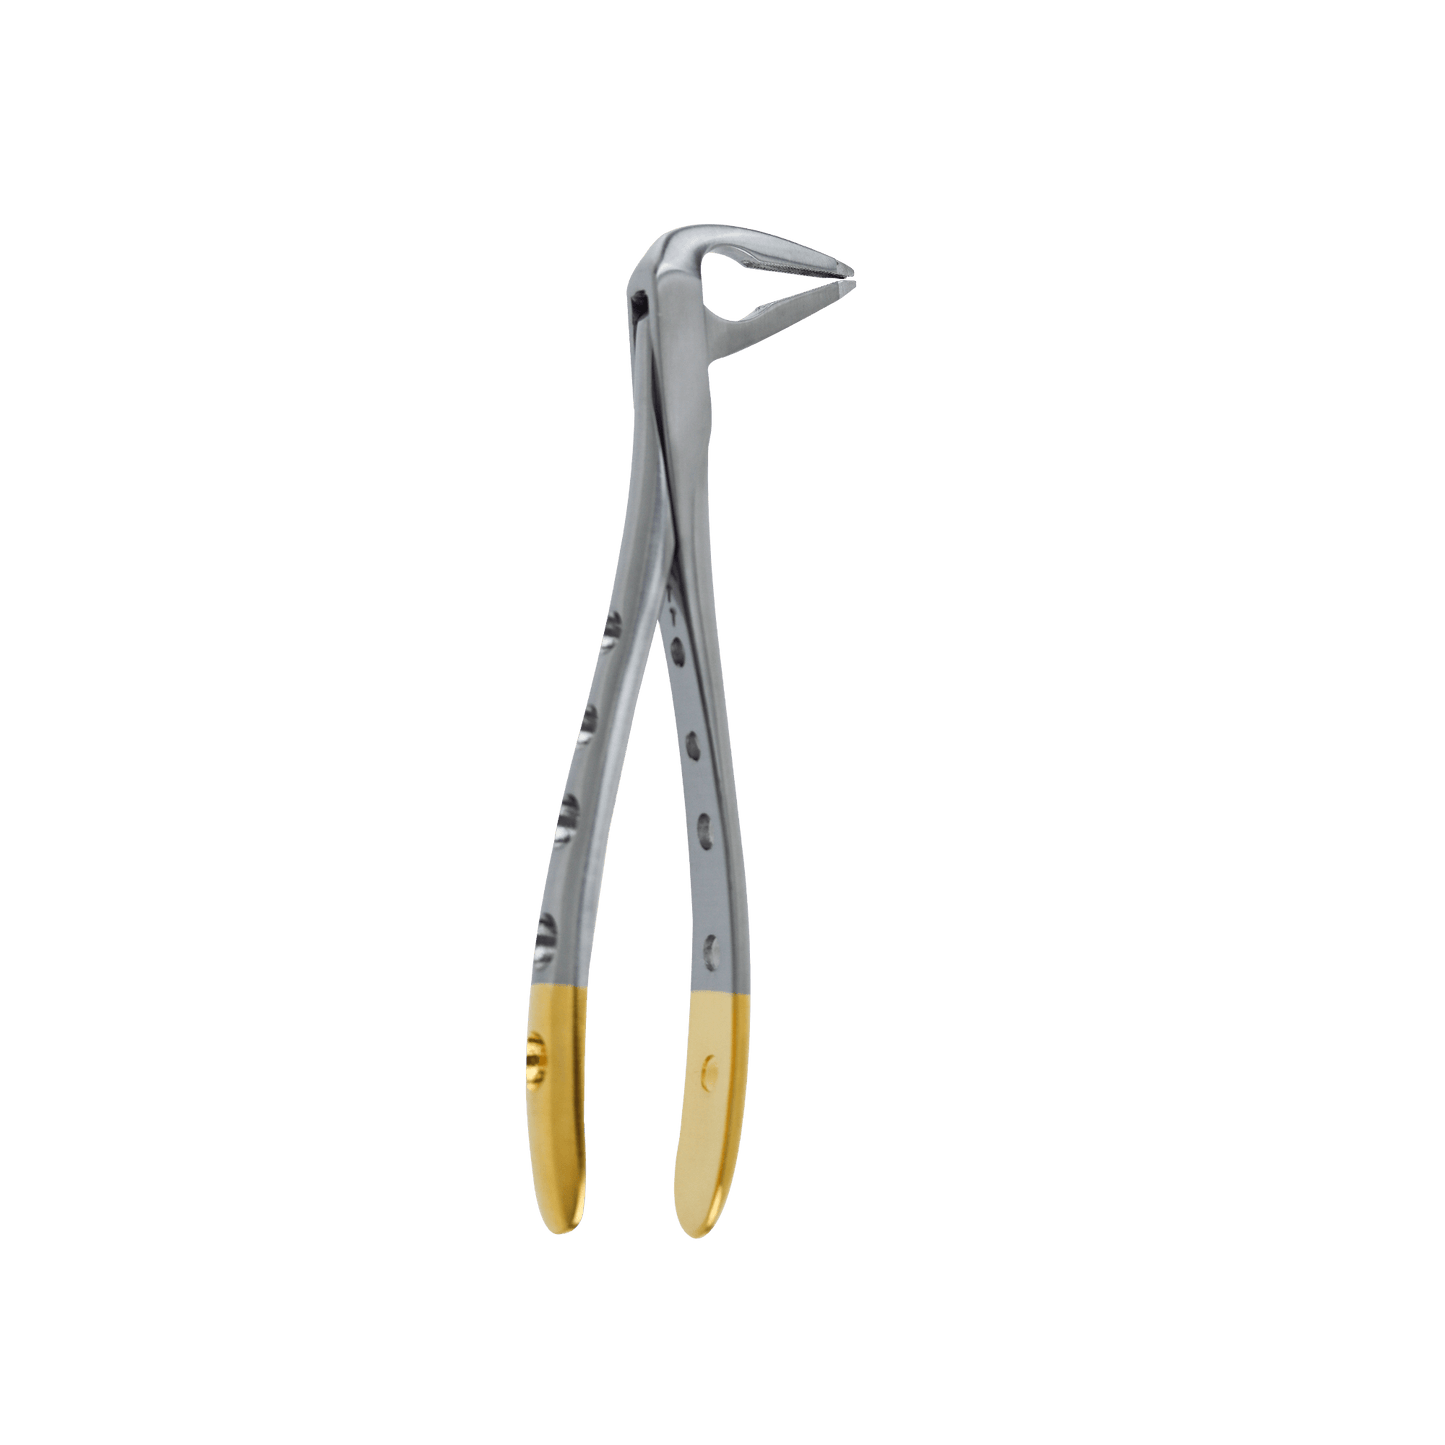 Atraumatic Extraction Apical Retention Forcep-Lower Anterior. Retention forceps